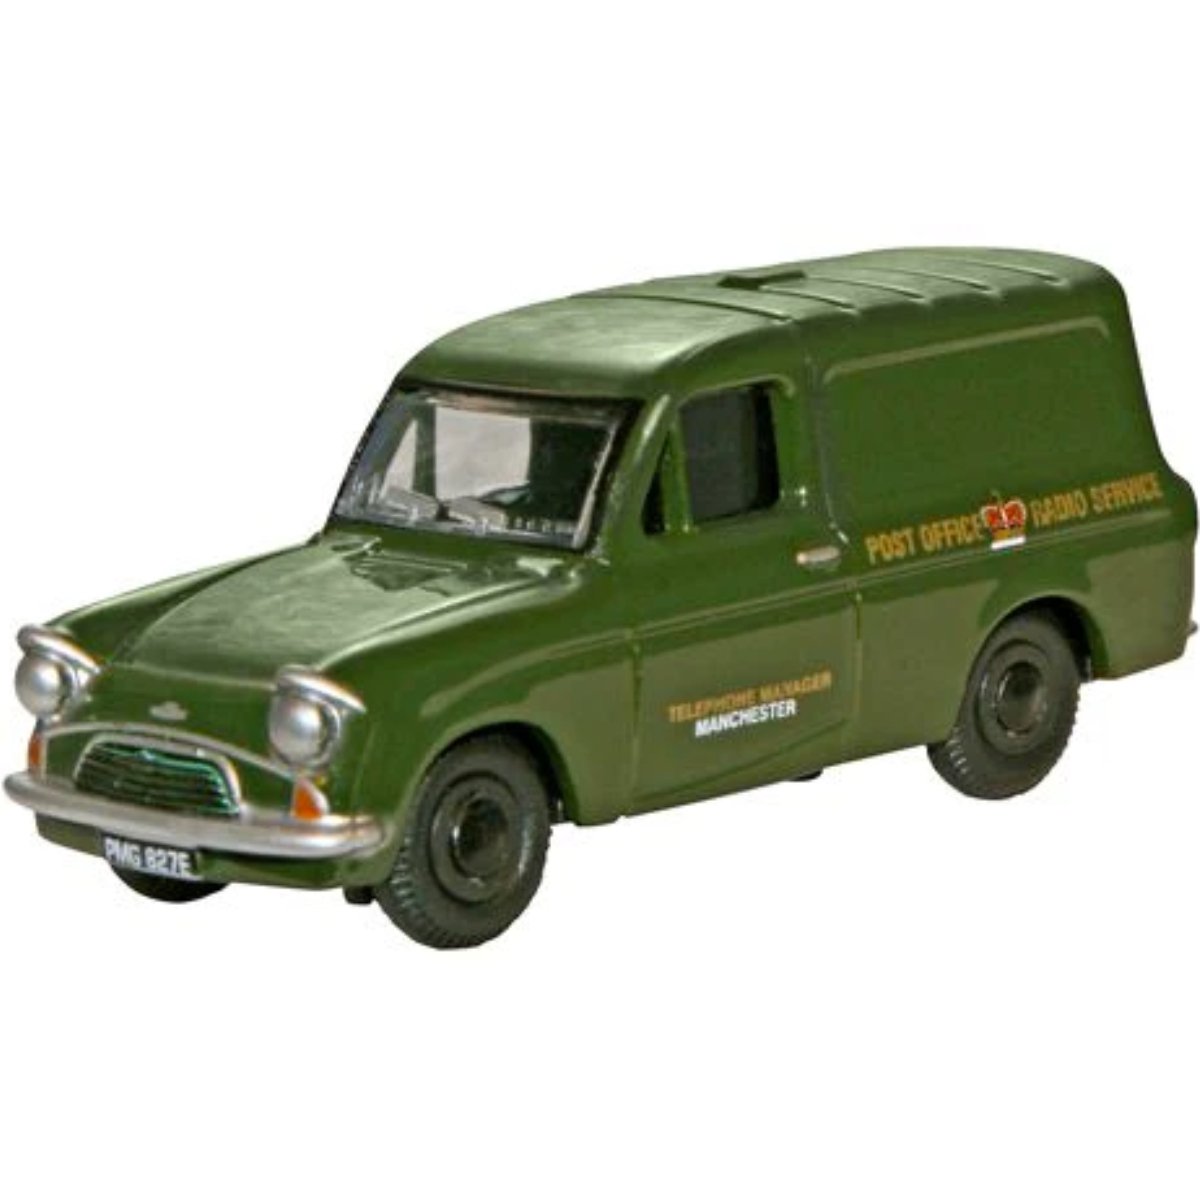 Oxford Diecast 76ANG005 Ford Anglia Van - Post Office Radio Service - Phillips Hobbies